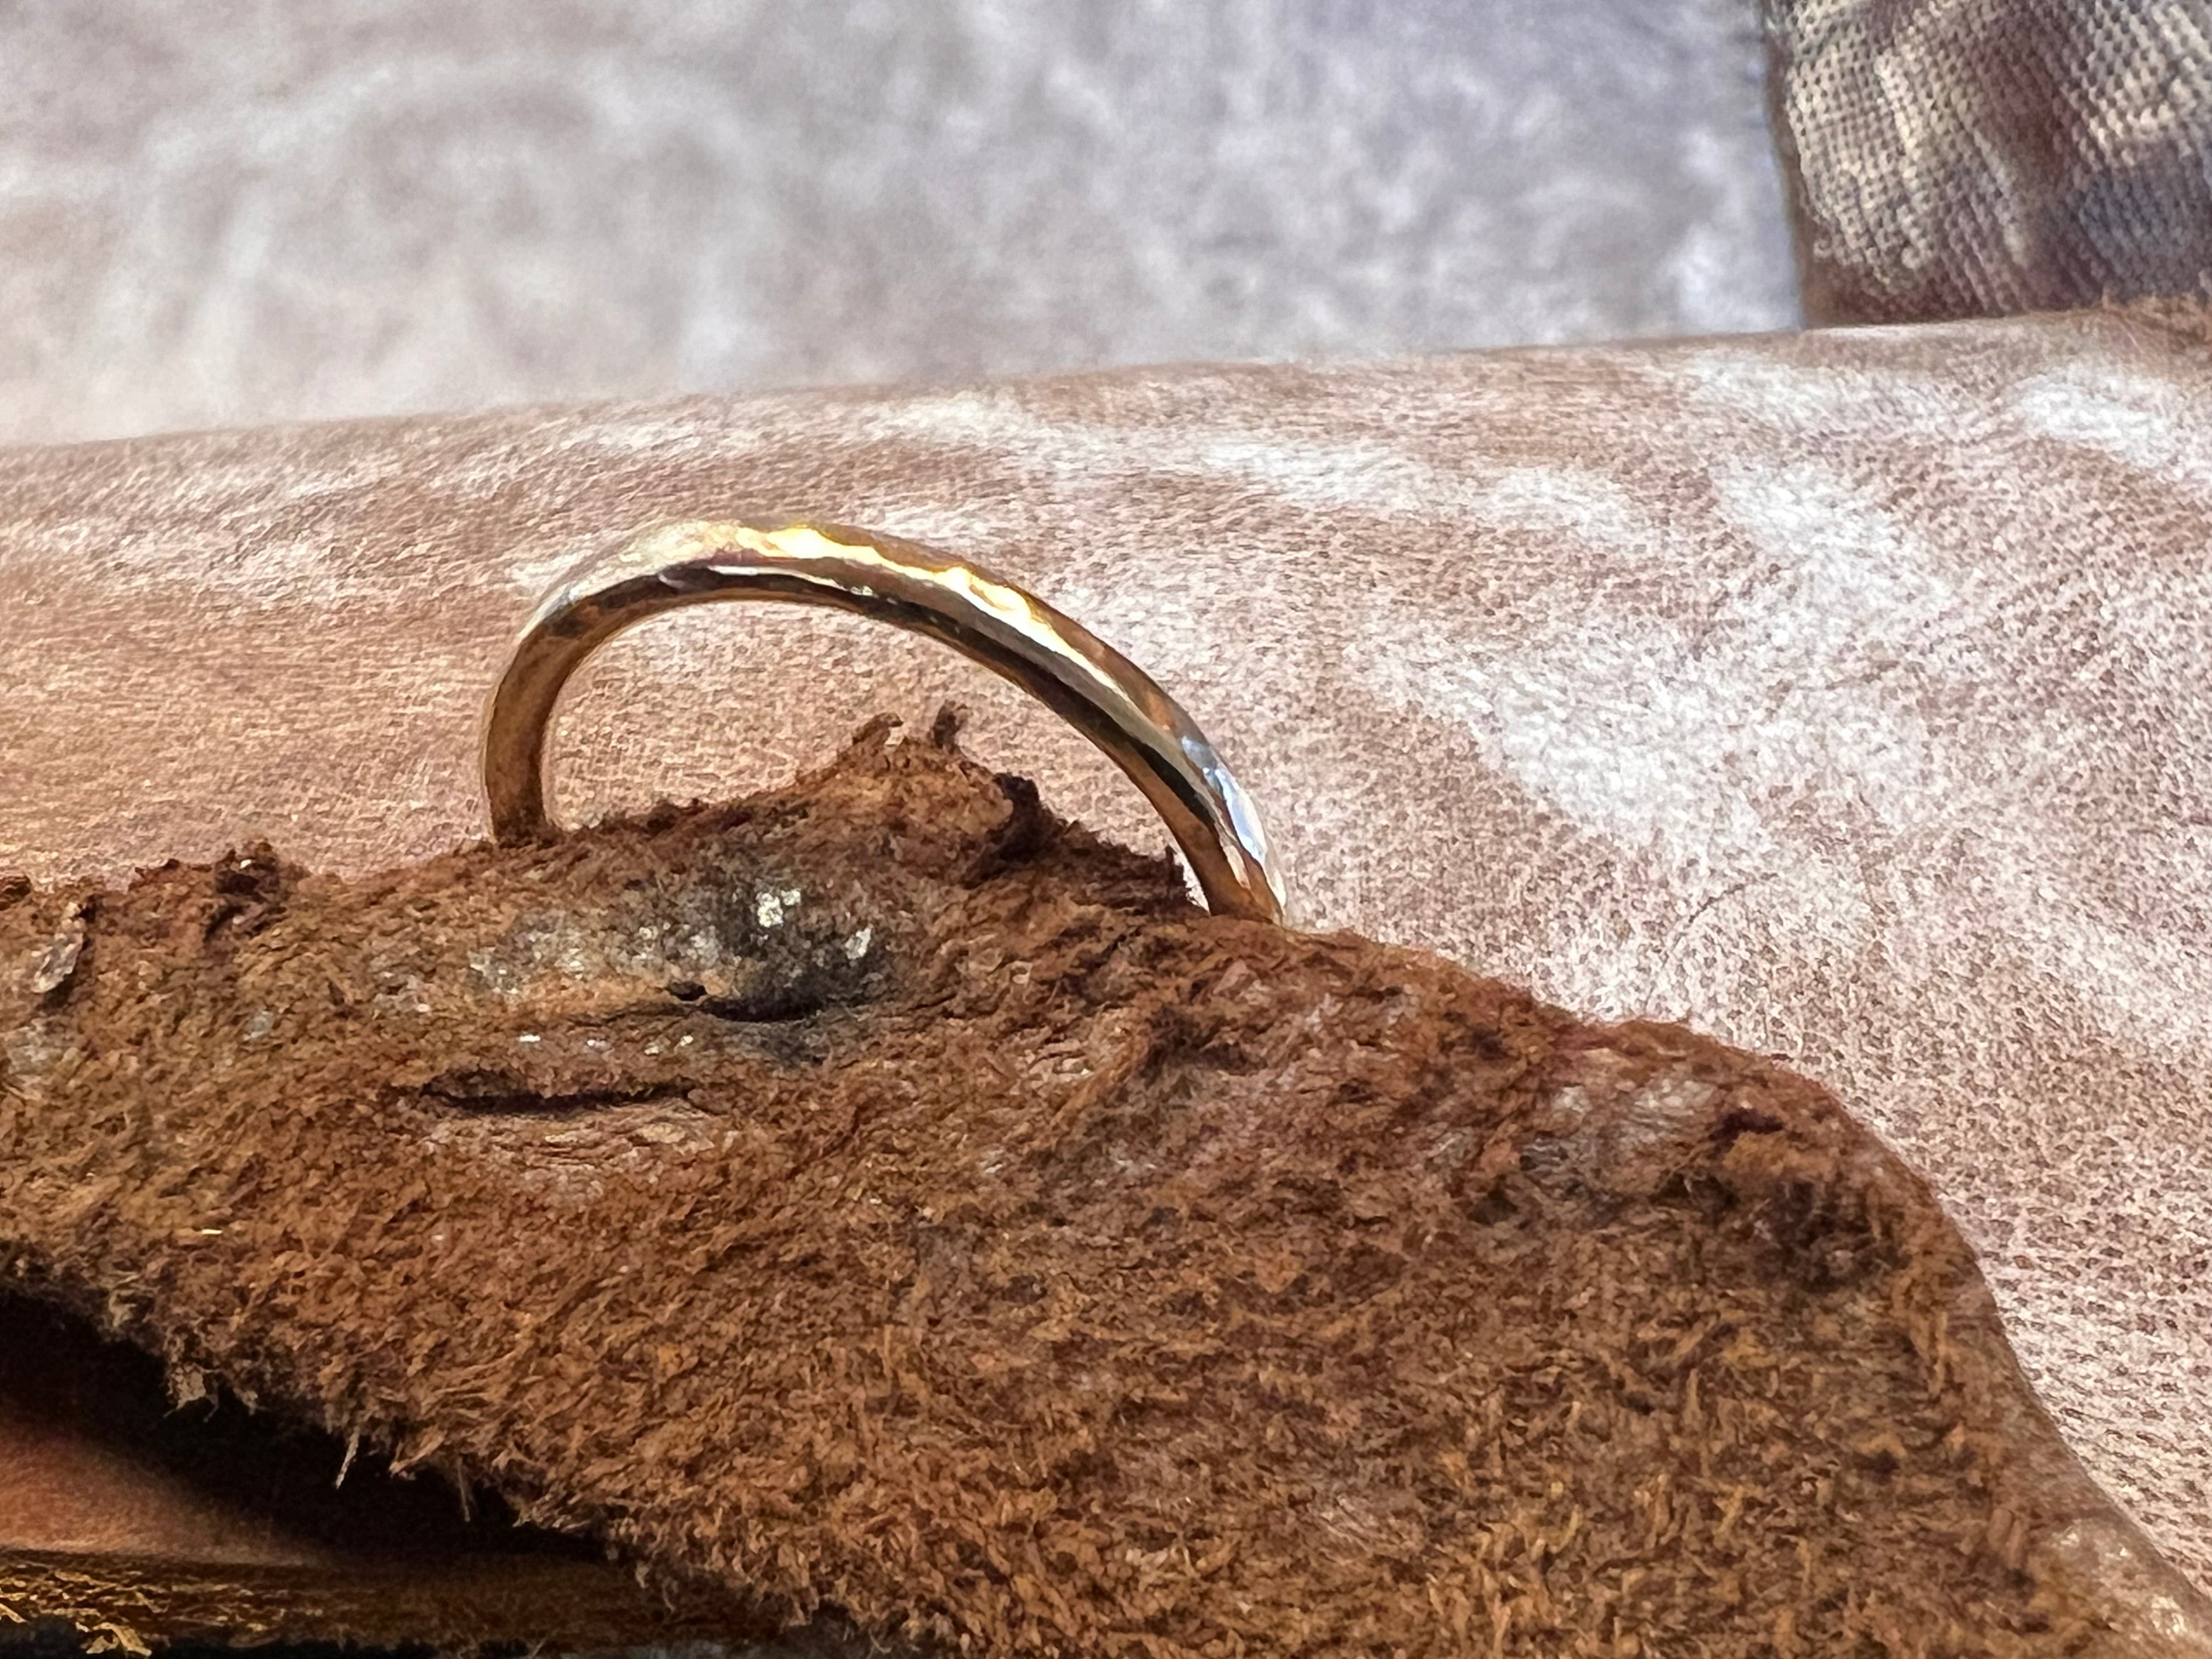 Guld ring 2 mm hammerslået overflade